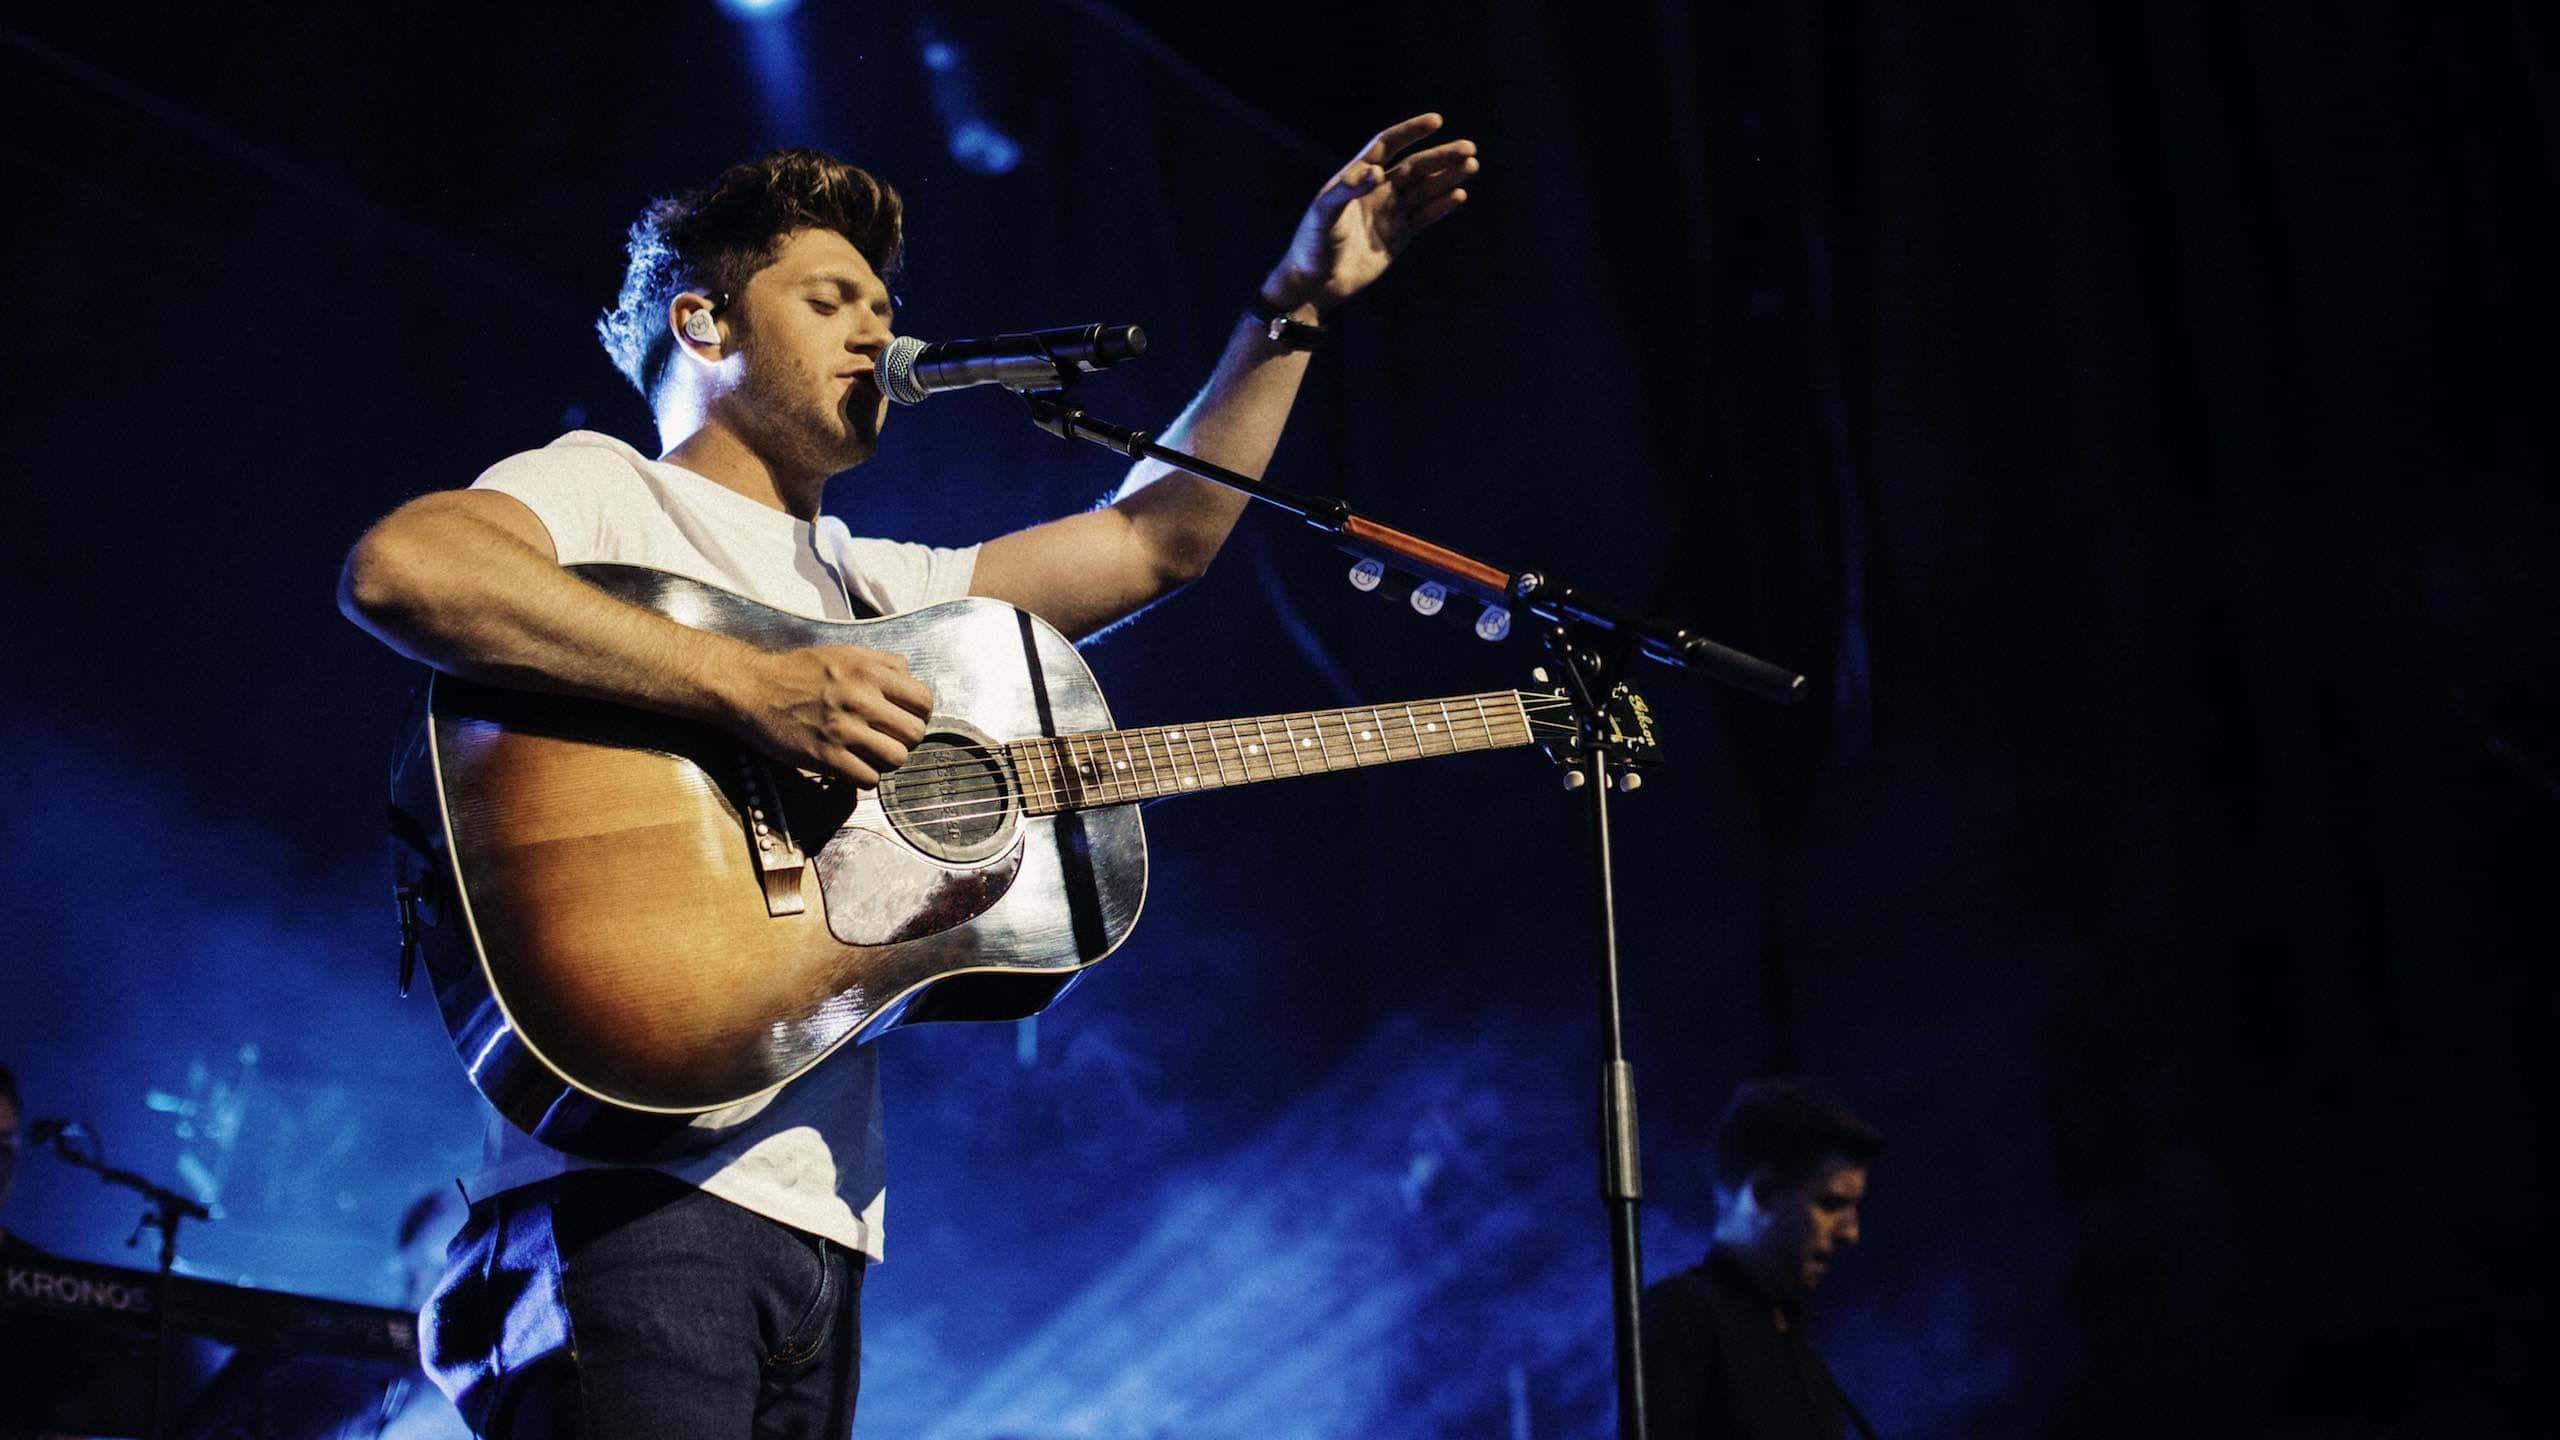 Music Legend Niall Horan Engaging With His Guitar